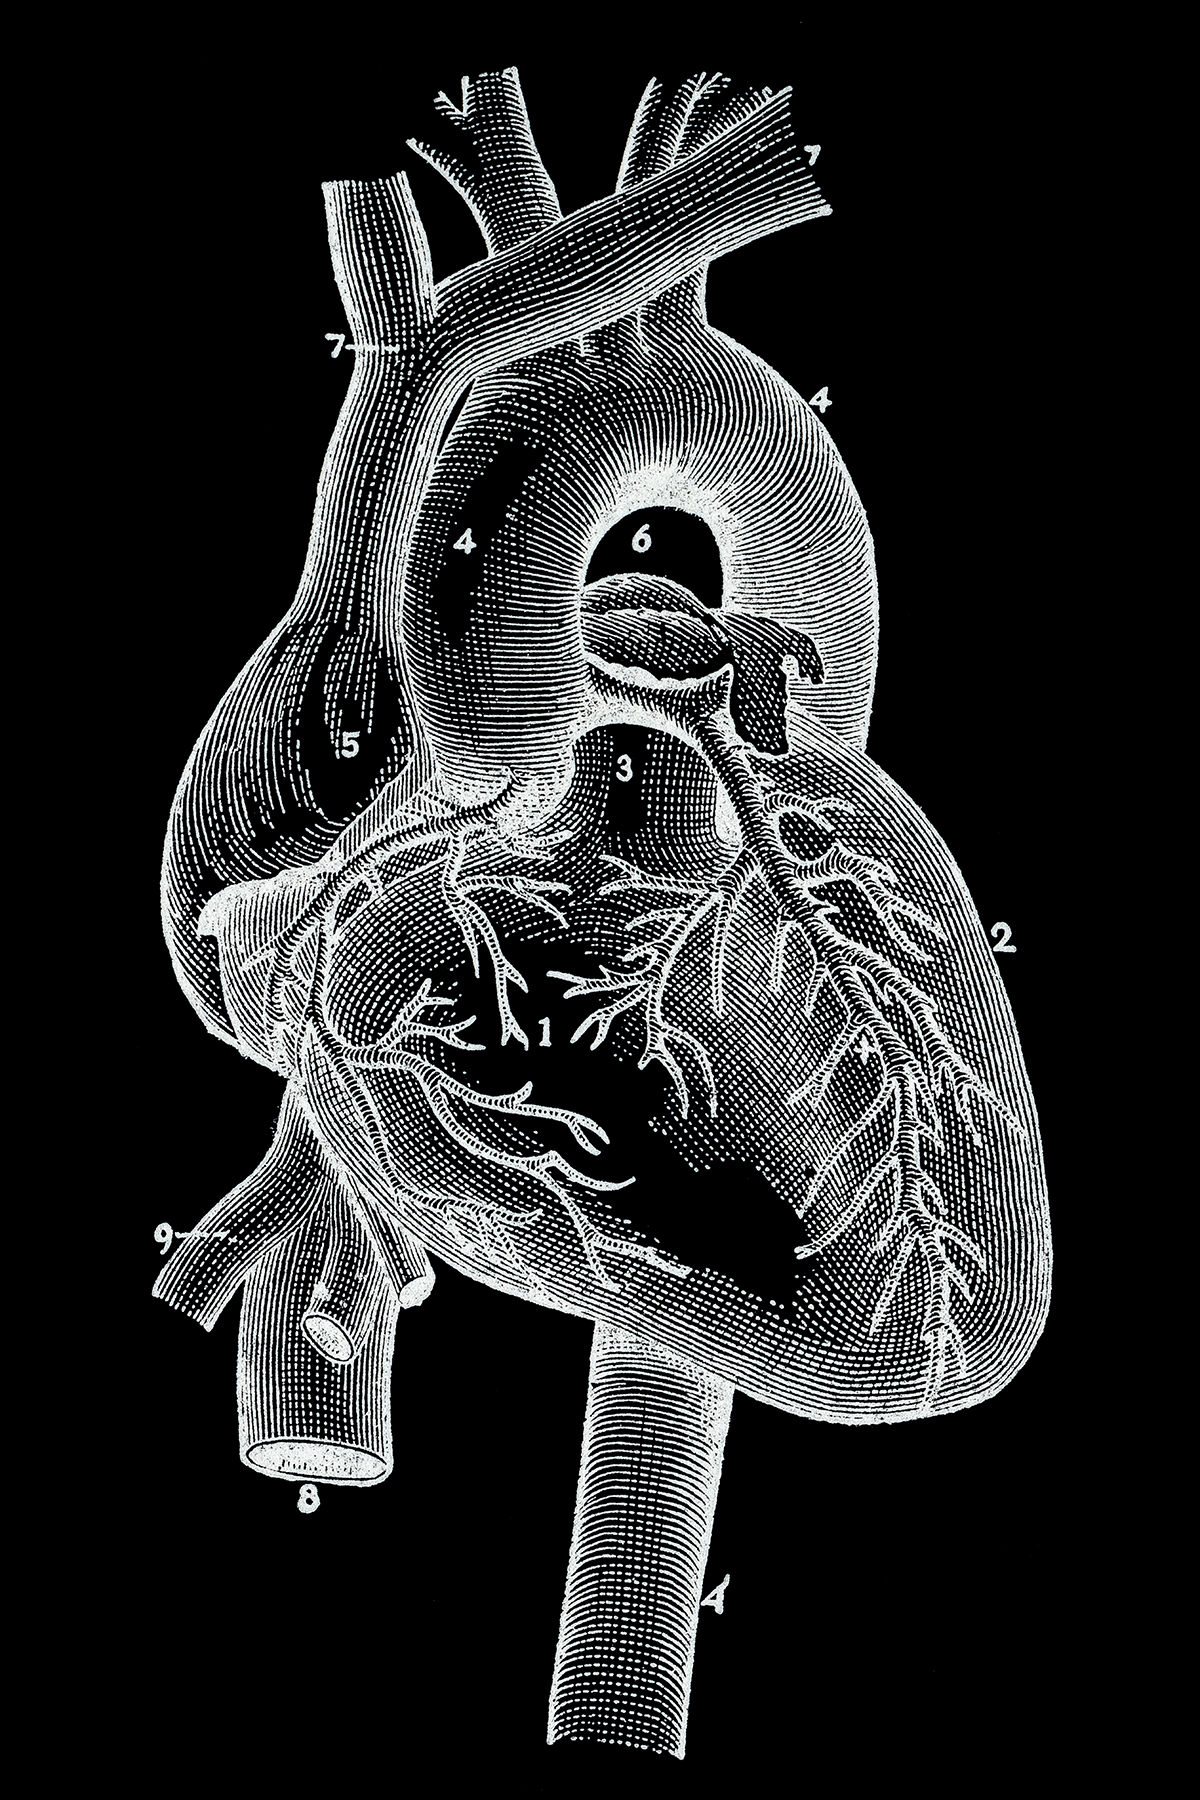 Inverted Vintage Anatomy Illustration - Human Heart Blood Vessels, Academical, Nicolasraymond, Scan, Right, HQ Photo